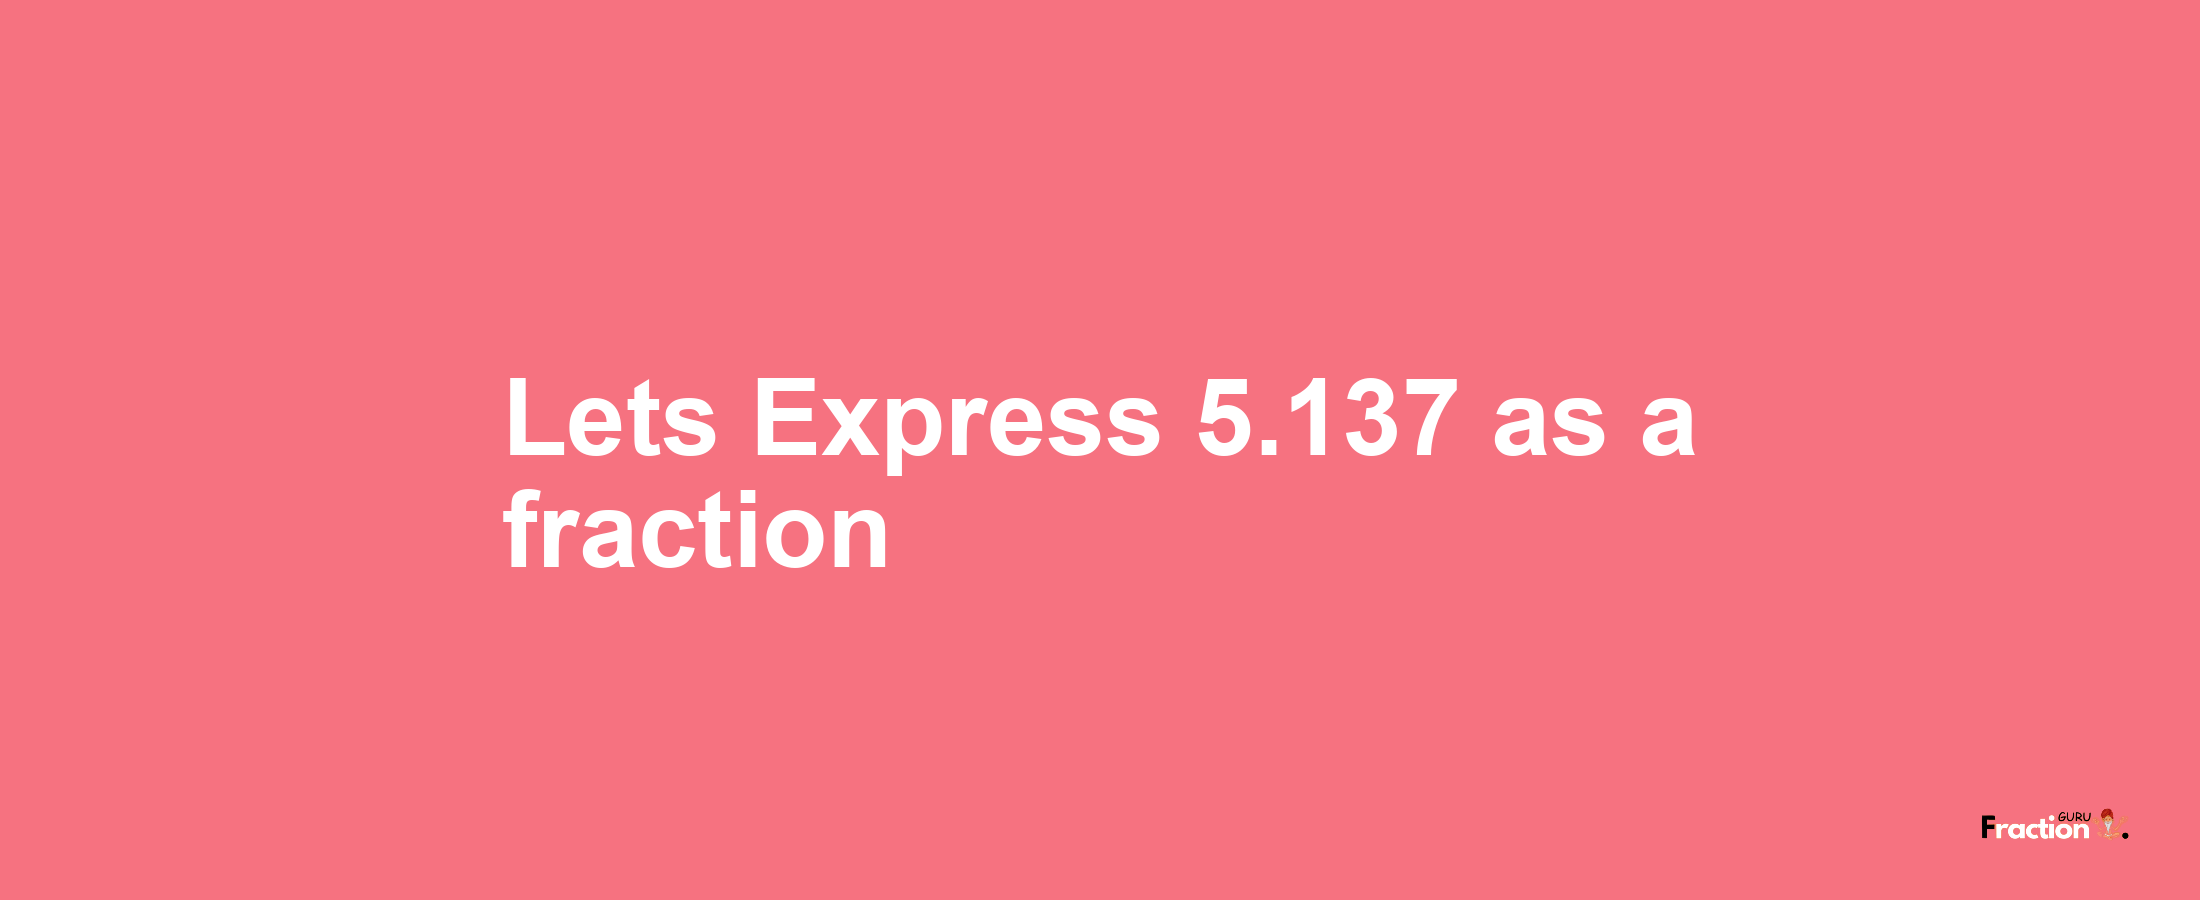 Lets Express 5.137 as afraction